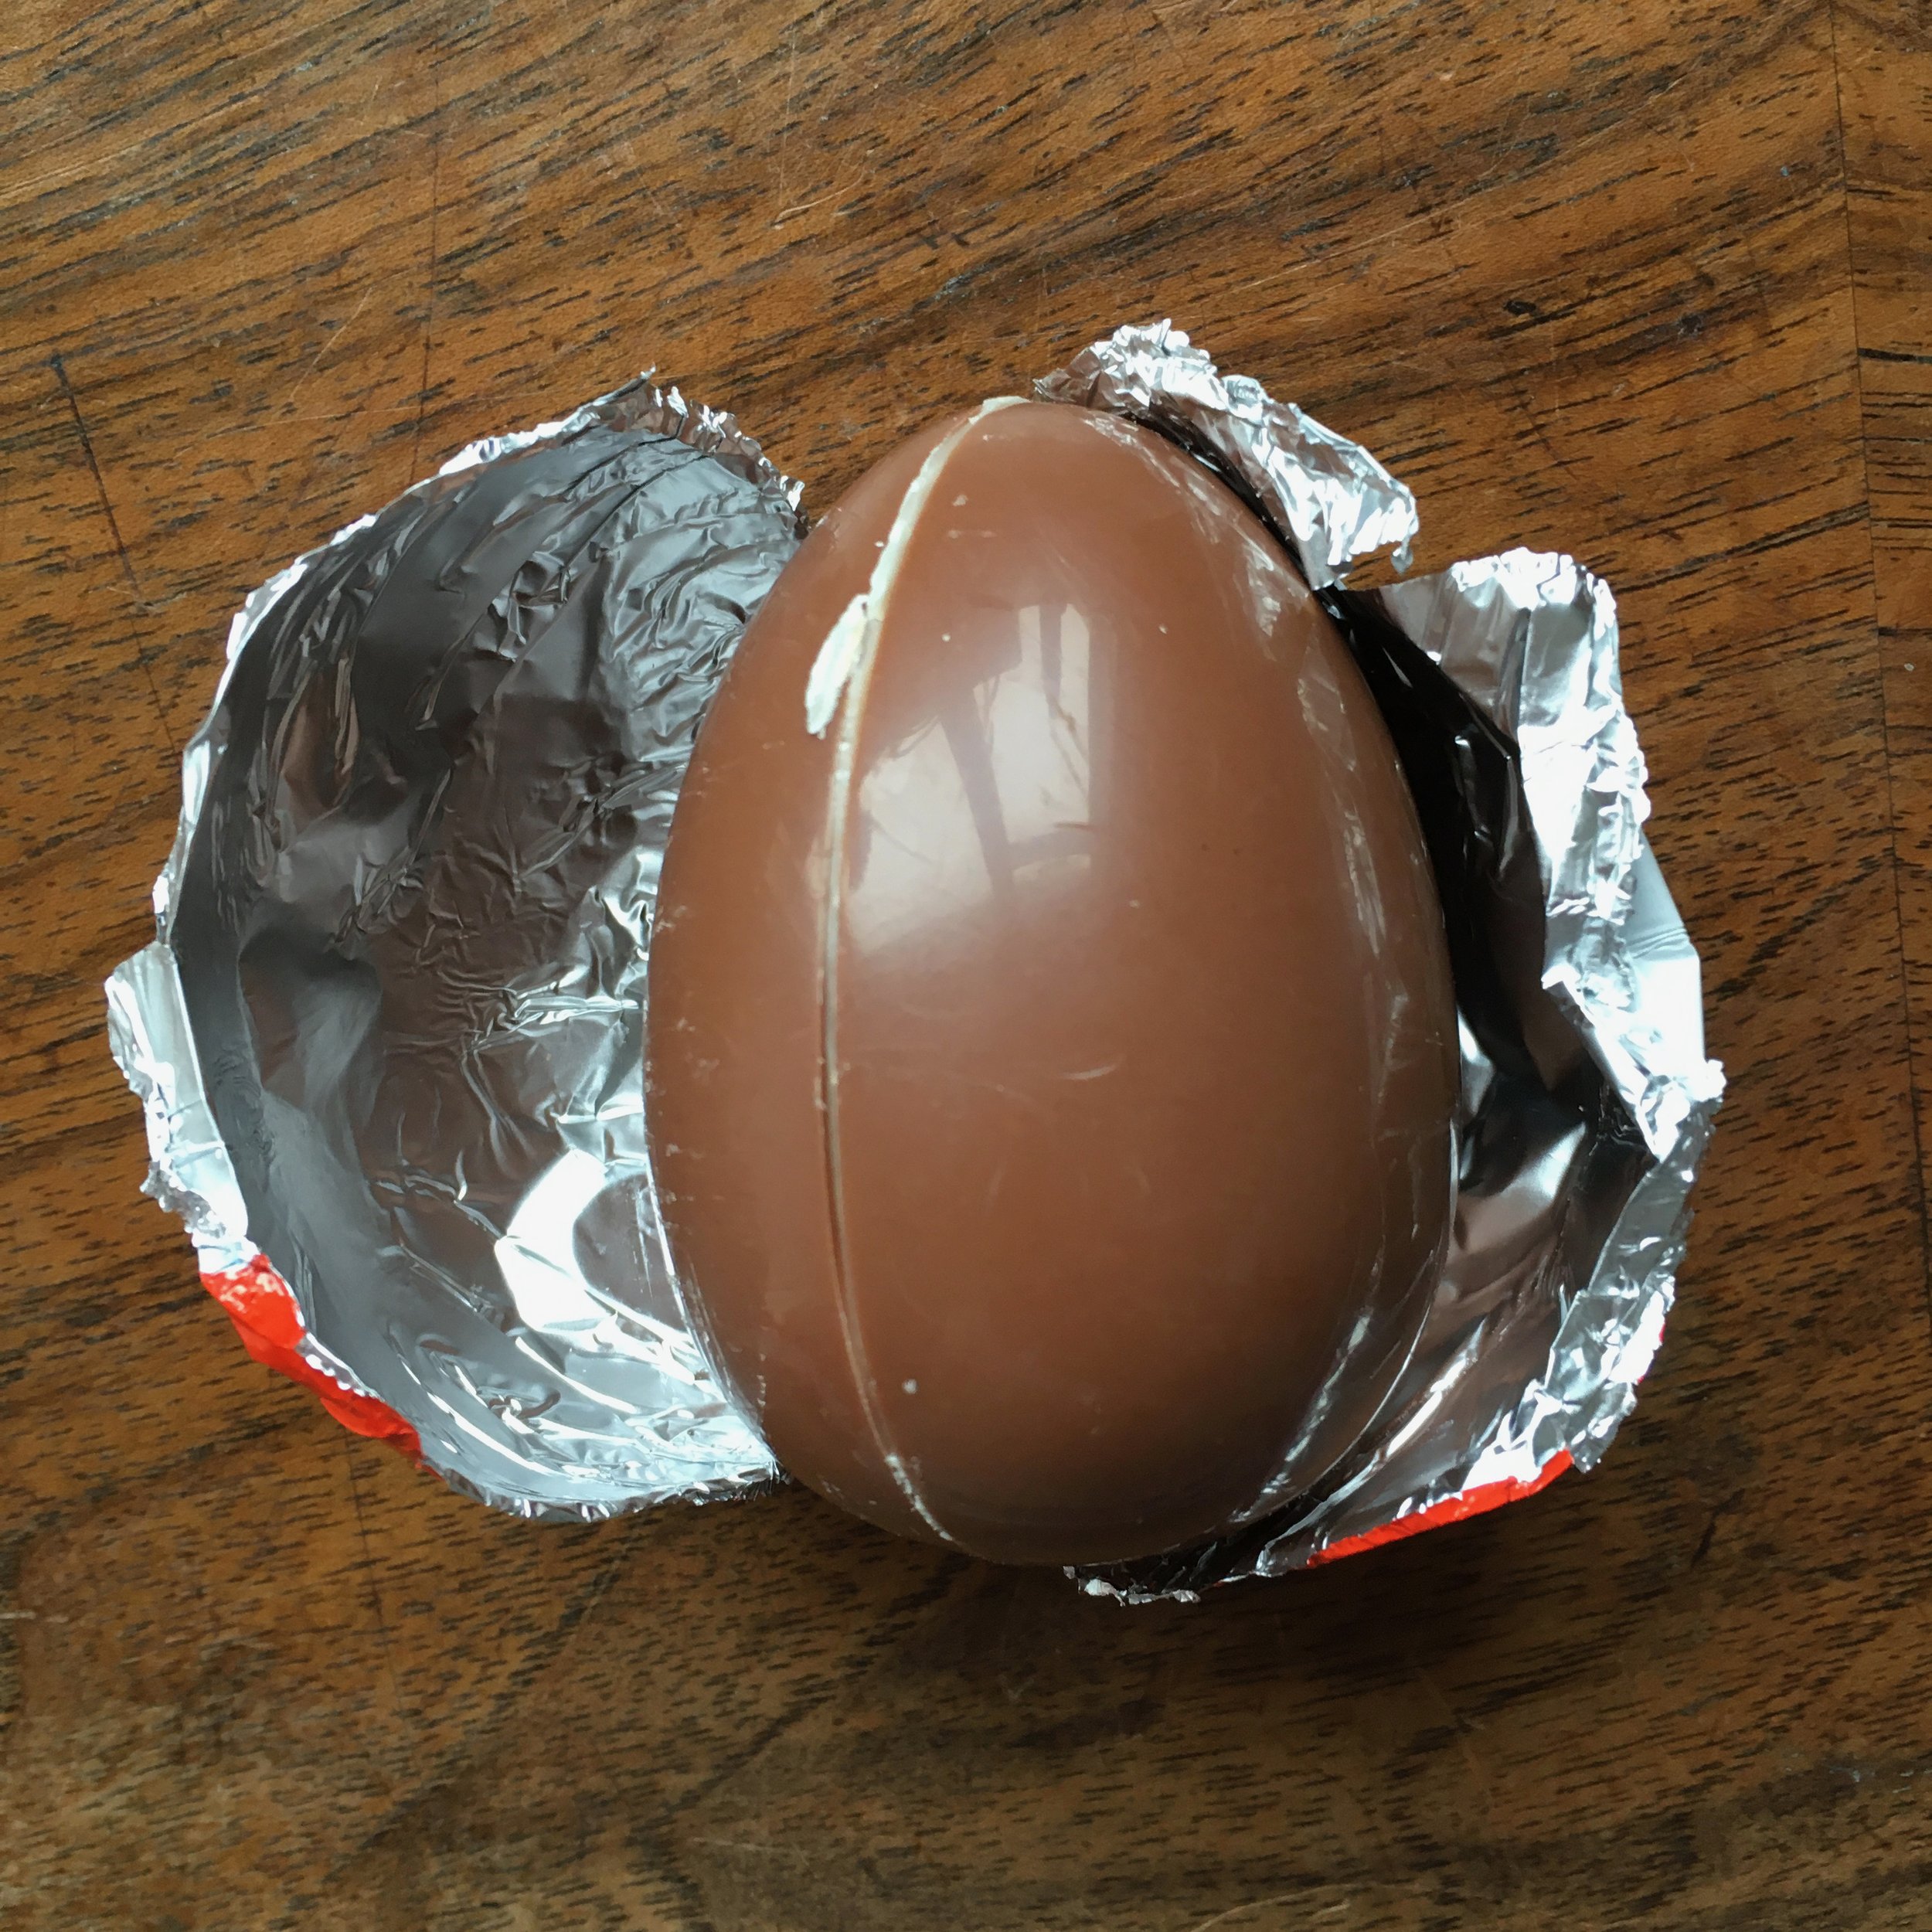  a Kinder Surprise egg, foil unwrapped to reveal the hollow chocolate egg within 